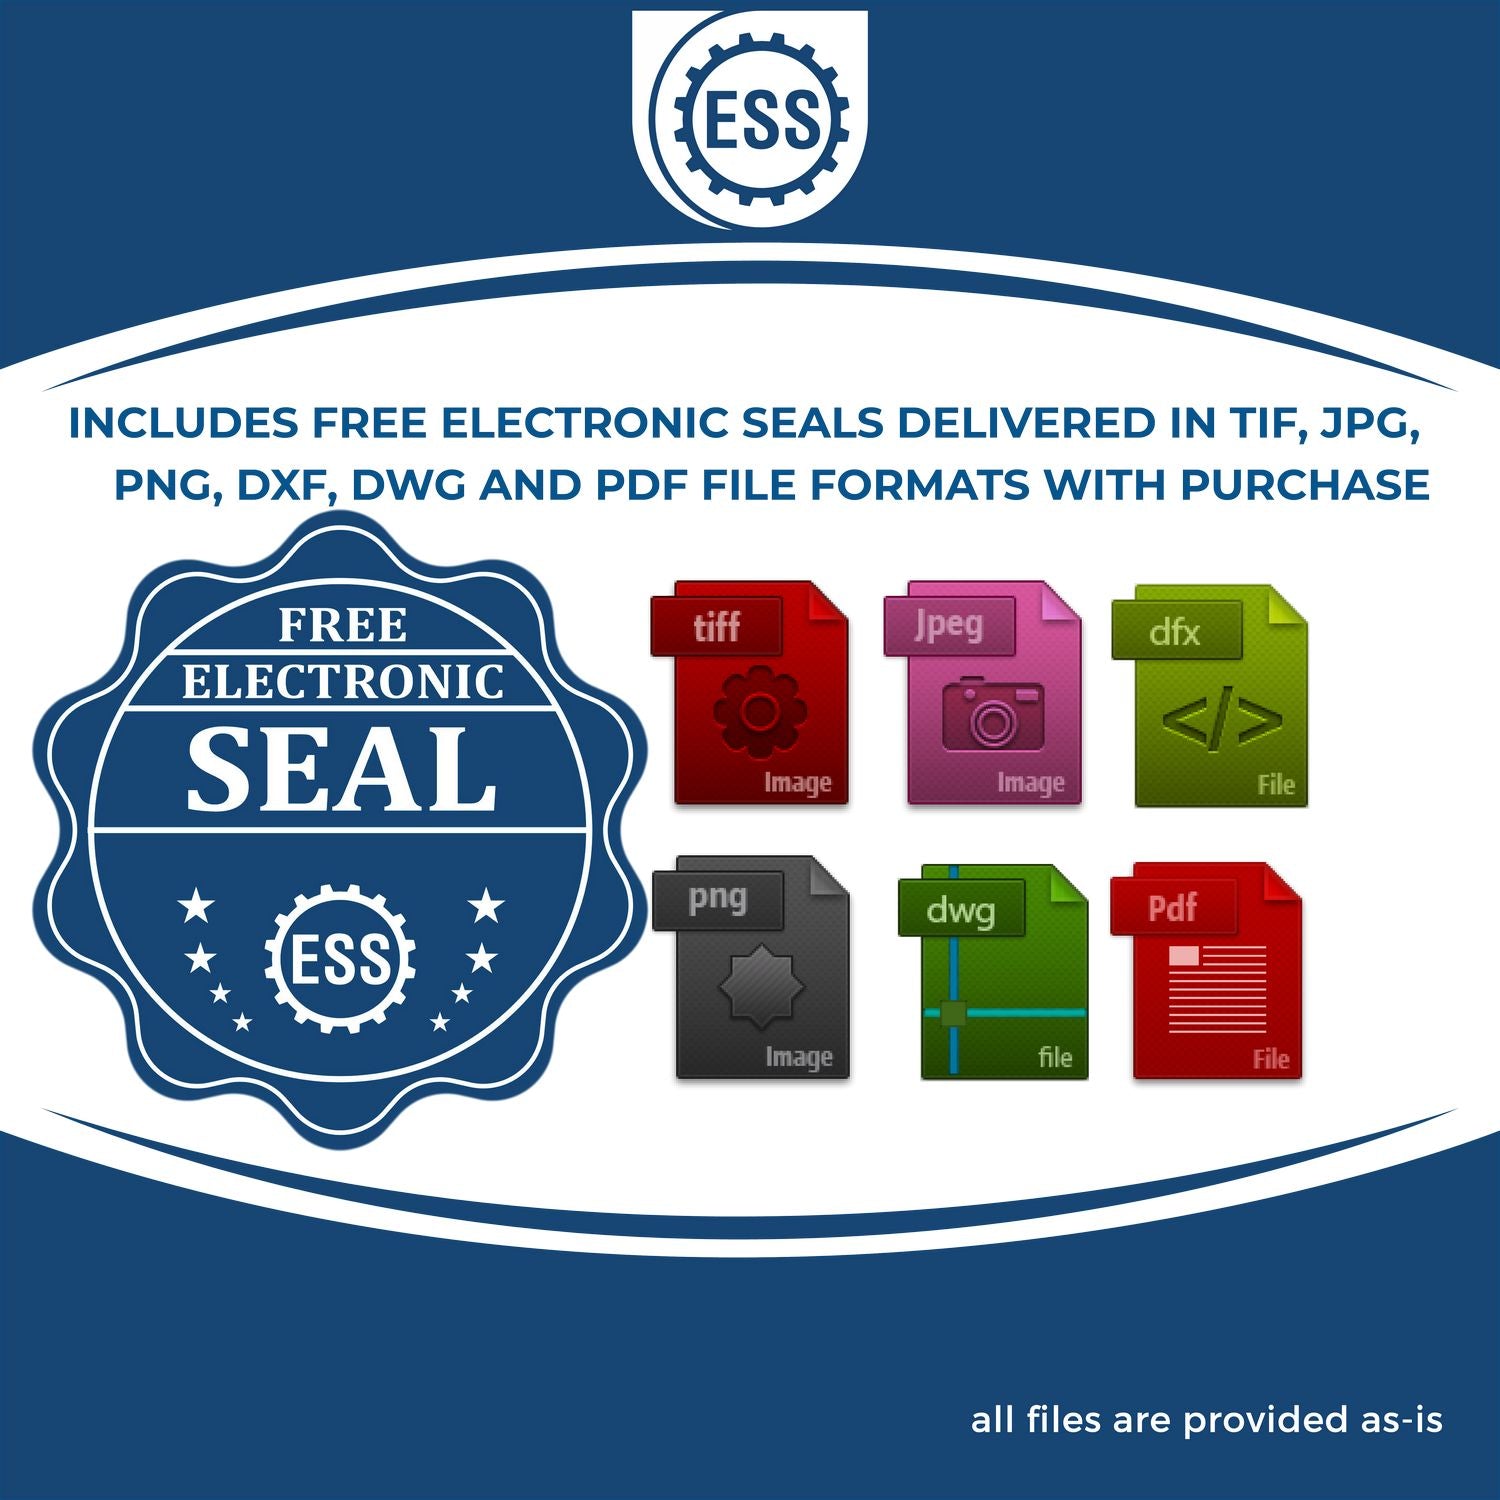 An infographic for the free electronic seal for the Extended Long Reach New Mexico Surveyor Embosser illustrating the different file type icons such as DXF, DWG, TIF, JPG and PNG.